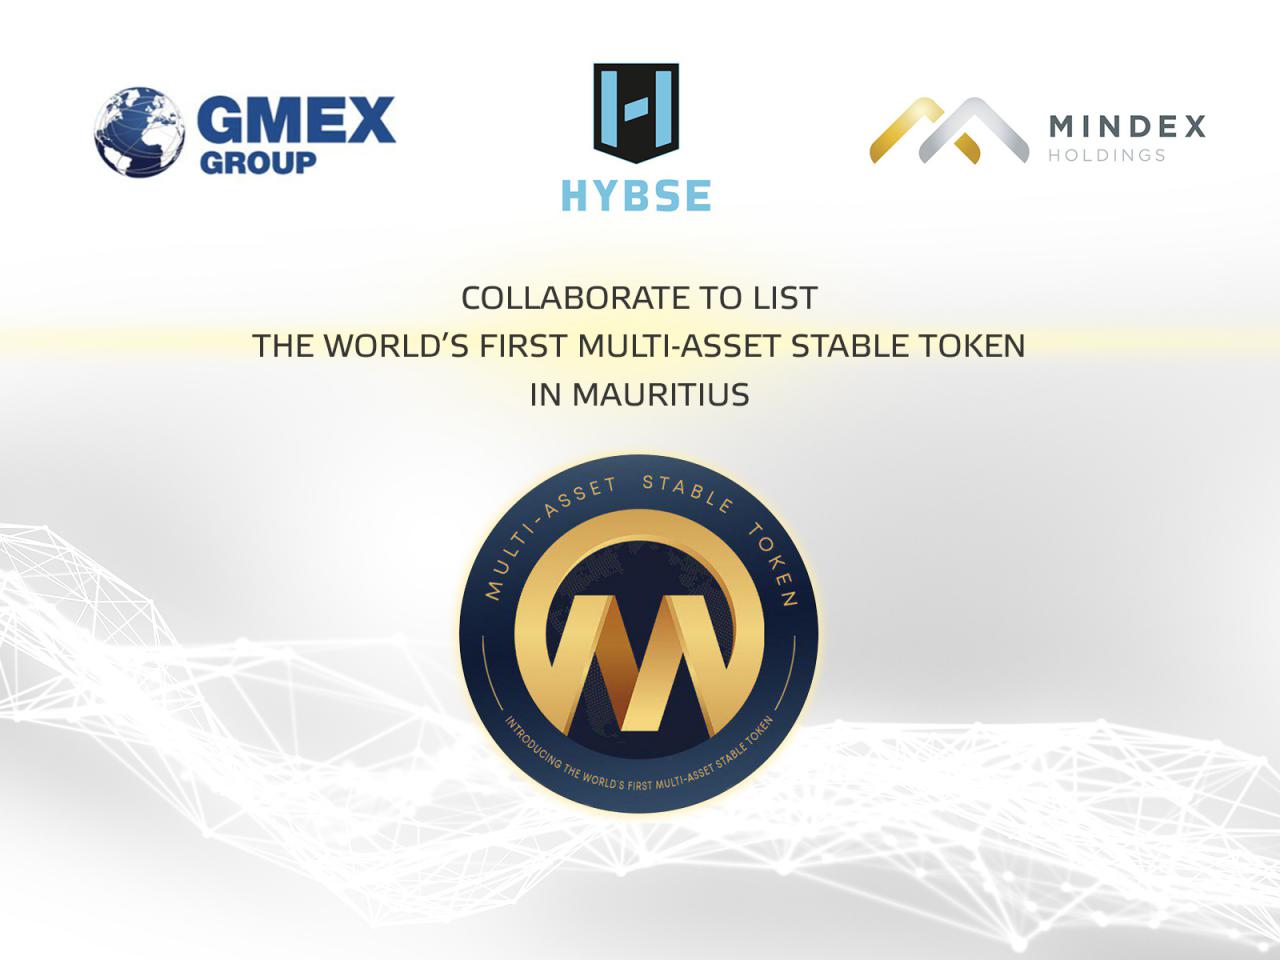 HYBSE, GMEX and MINDEX collaborate to list the worlds first Multi-Asset Stable Token in Mauritius